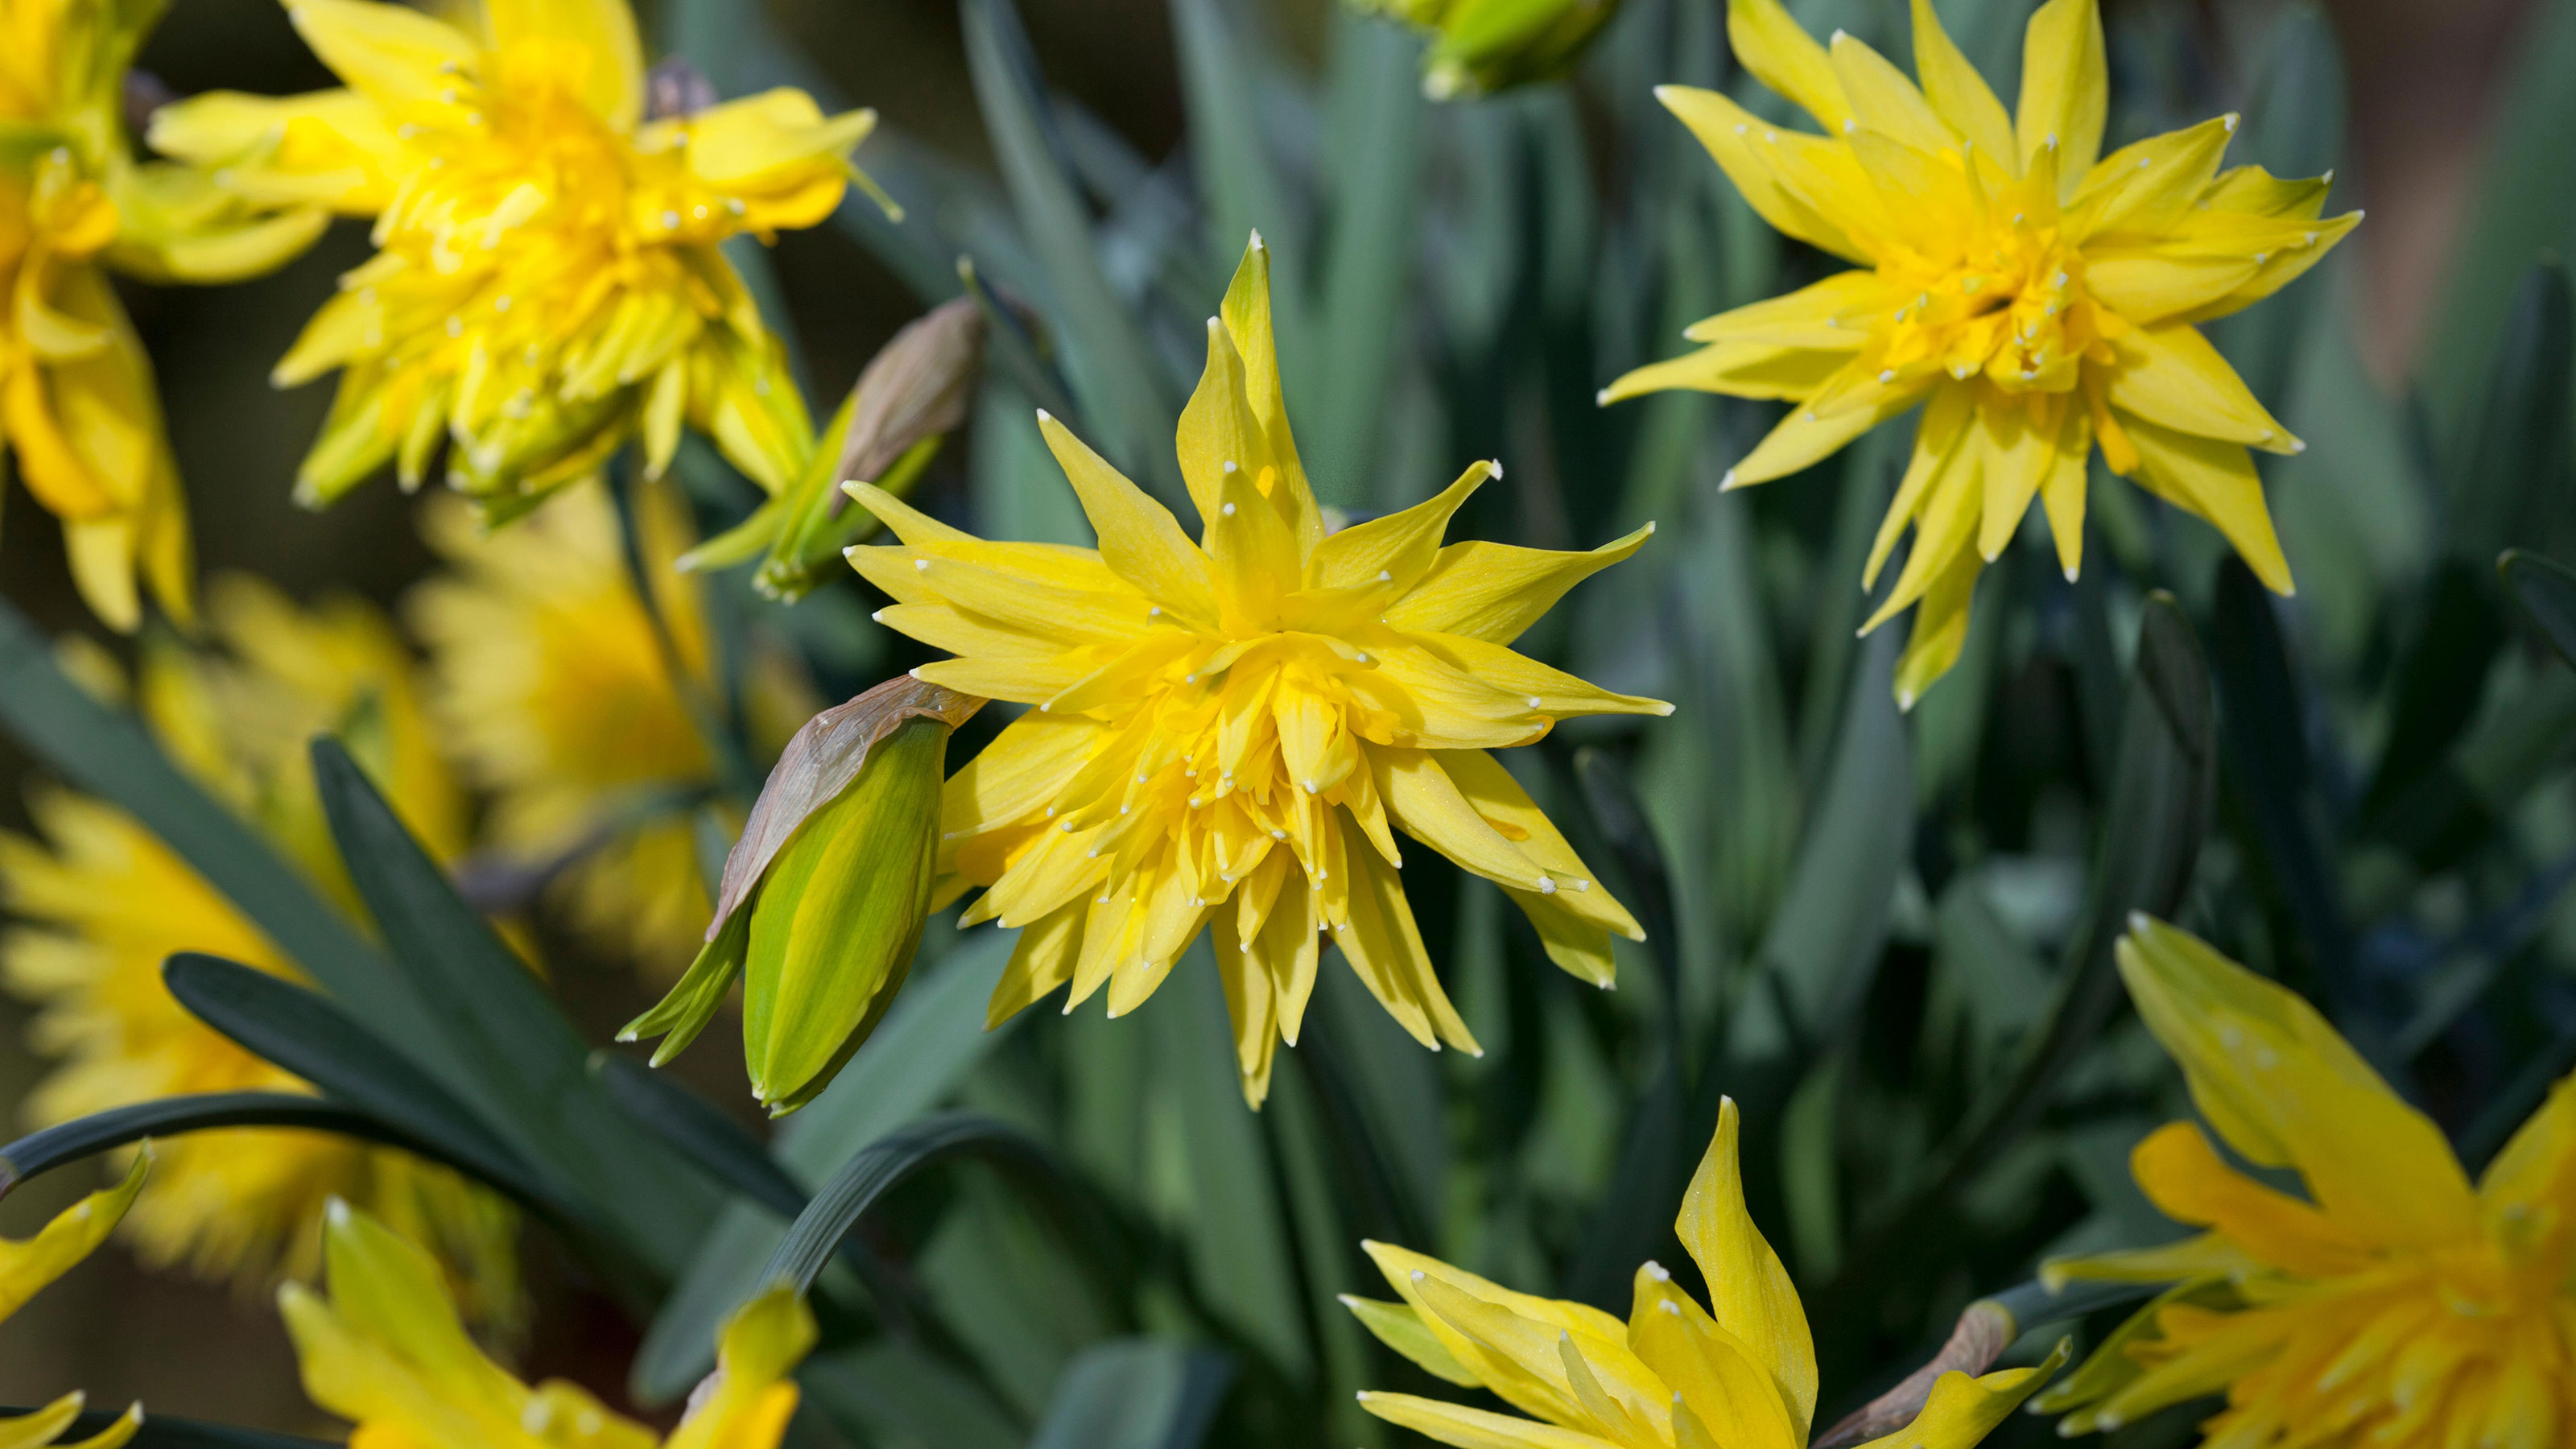 Types of Daffodils to Know and Grow